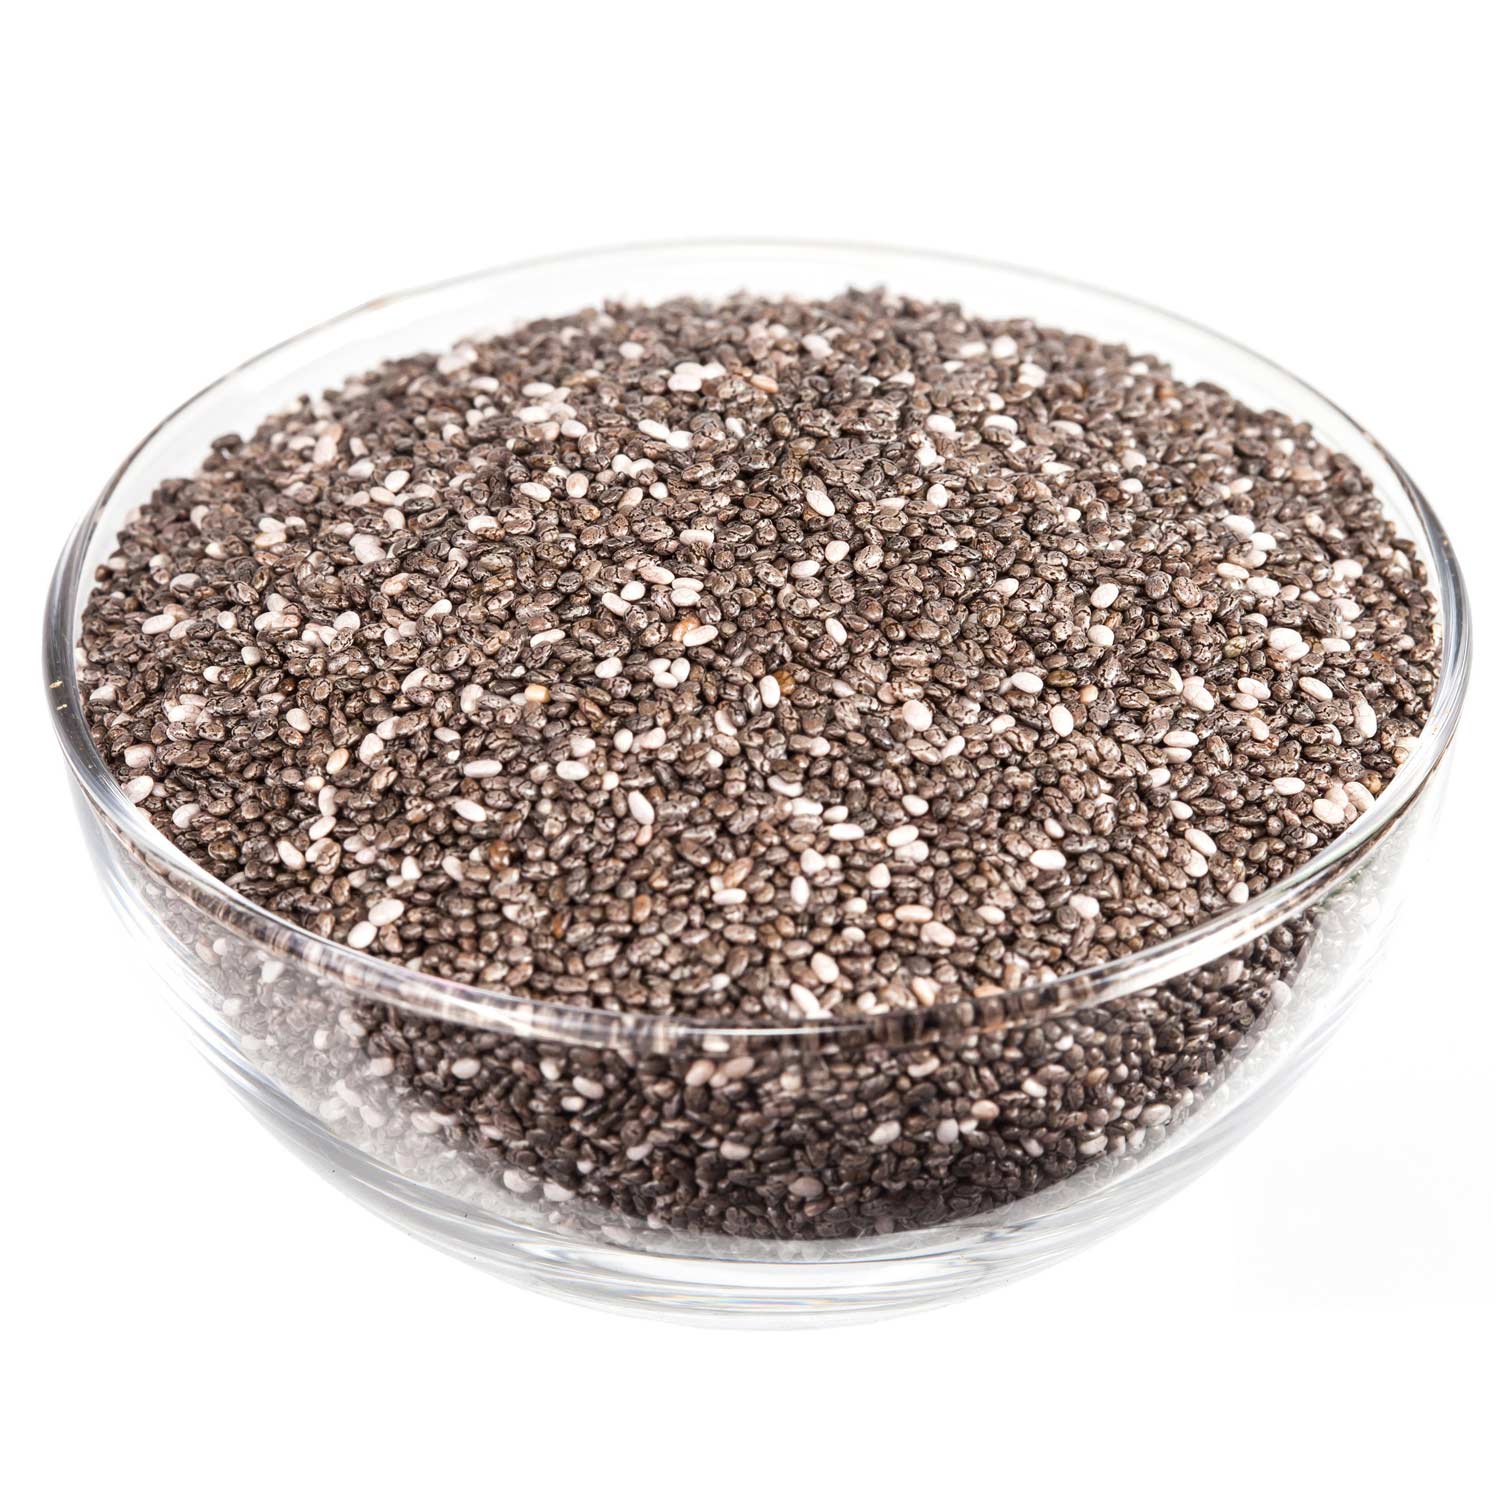 Chia Seeds In Bowl, Isolated On White Background.